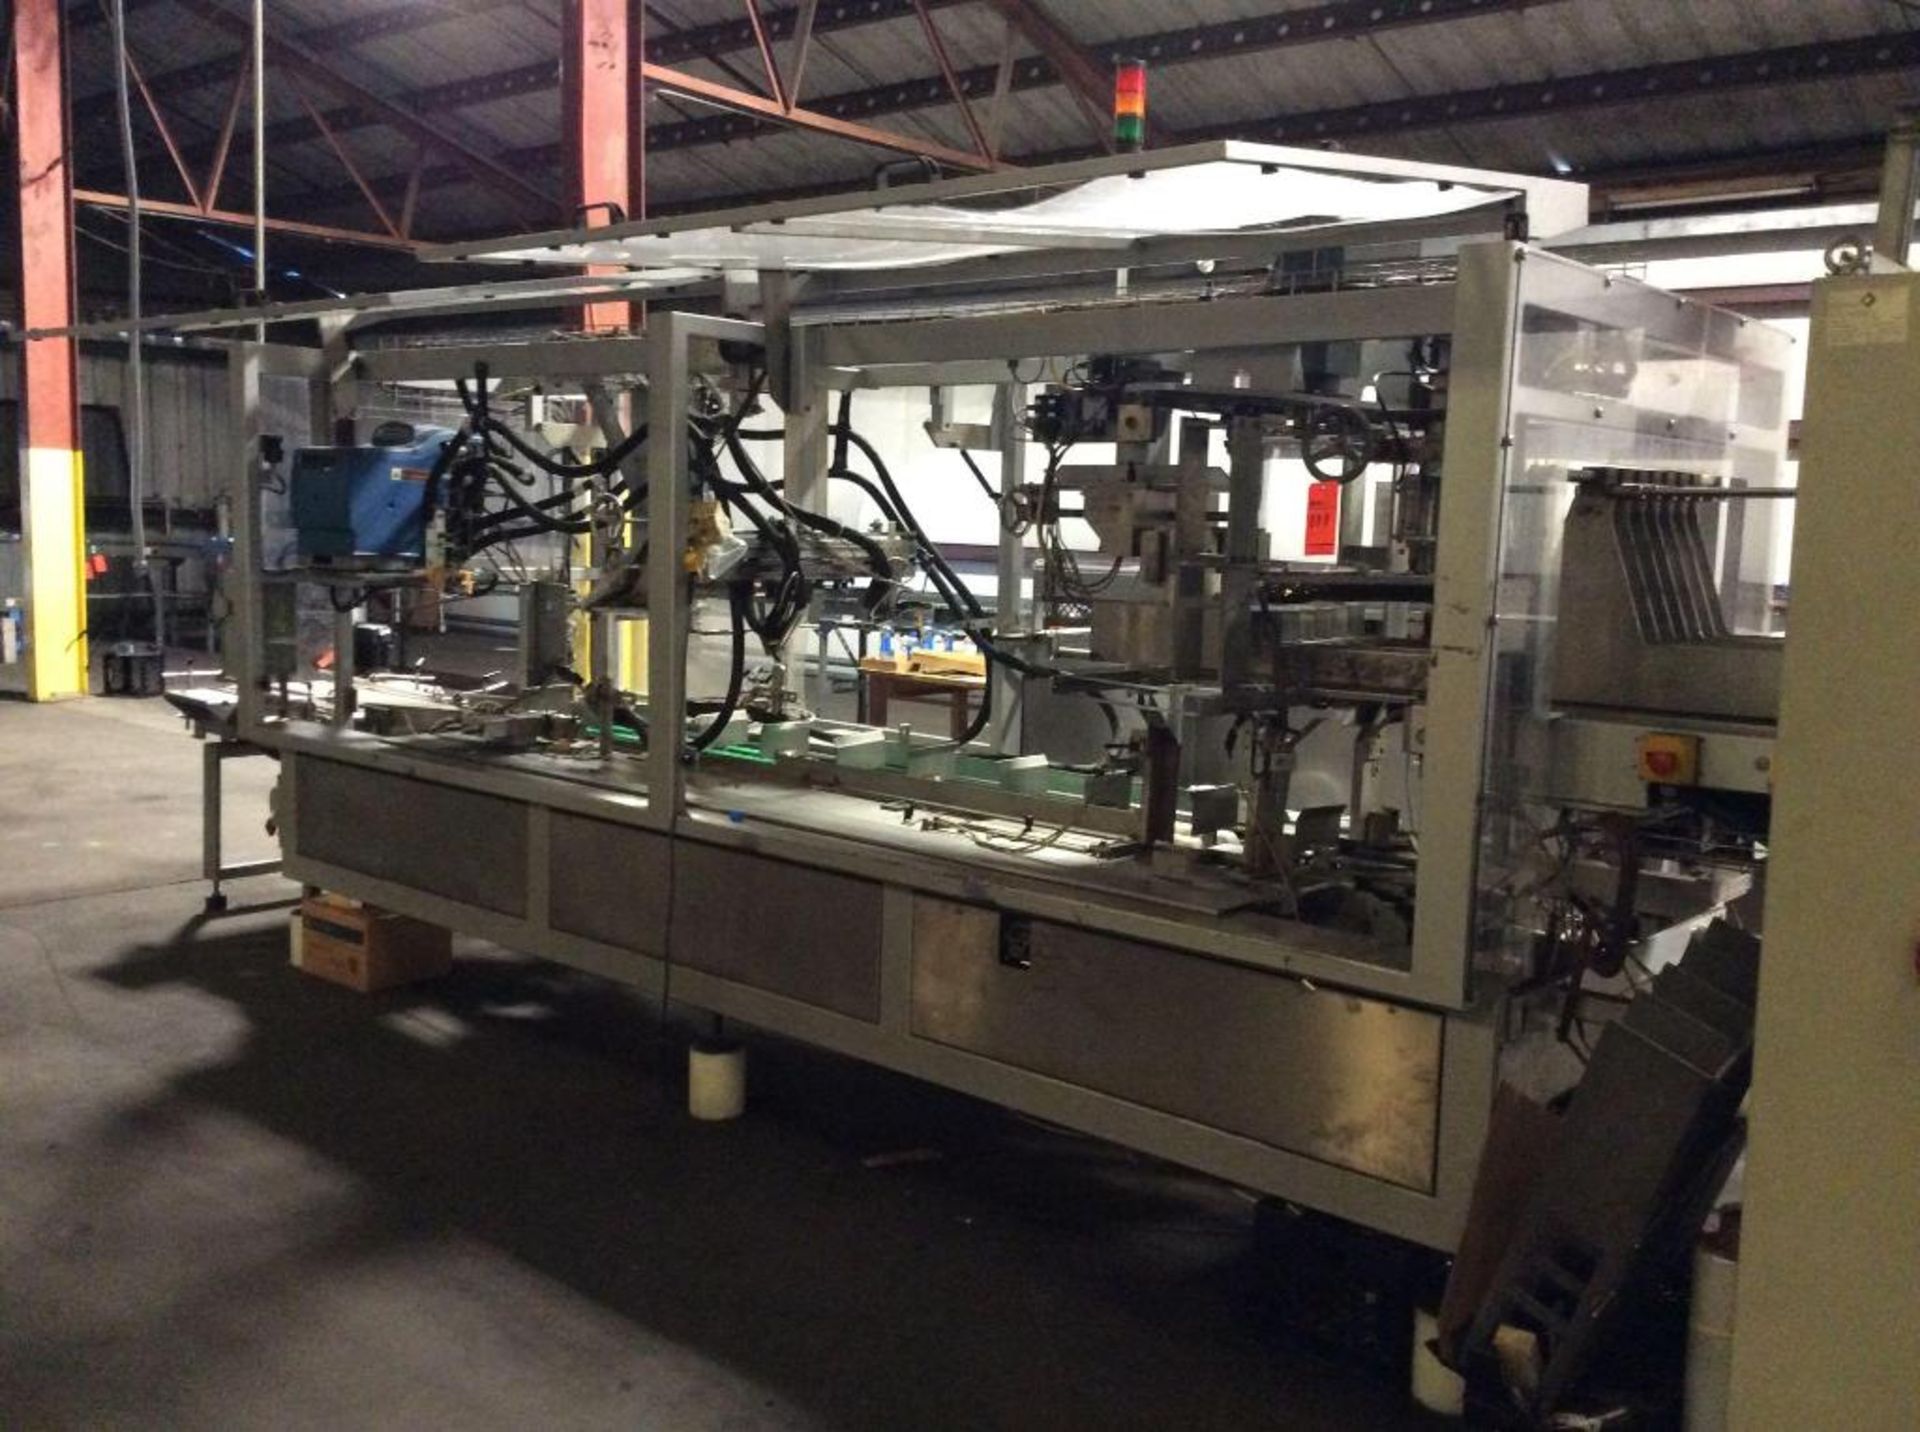 Meypack Wraparound Case / Tray Packer, mn VP451, sn 9439, capable of 30 trays / cases per minute max - Image 5 of 10